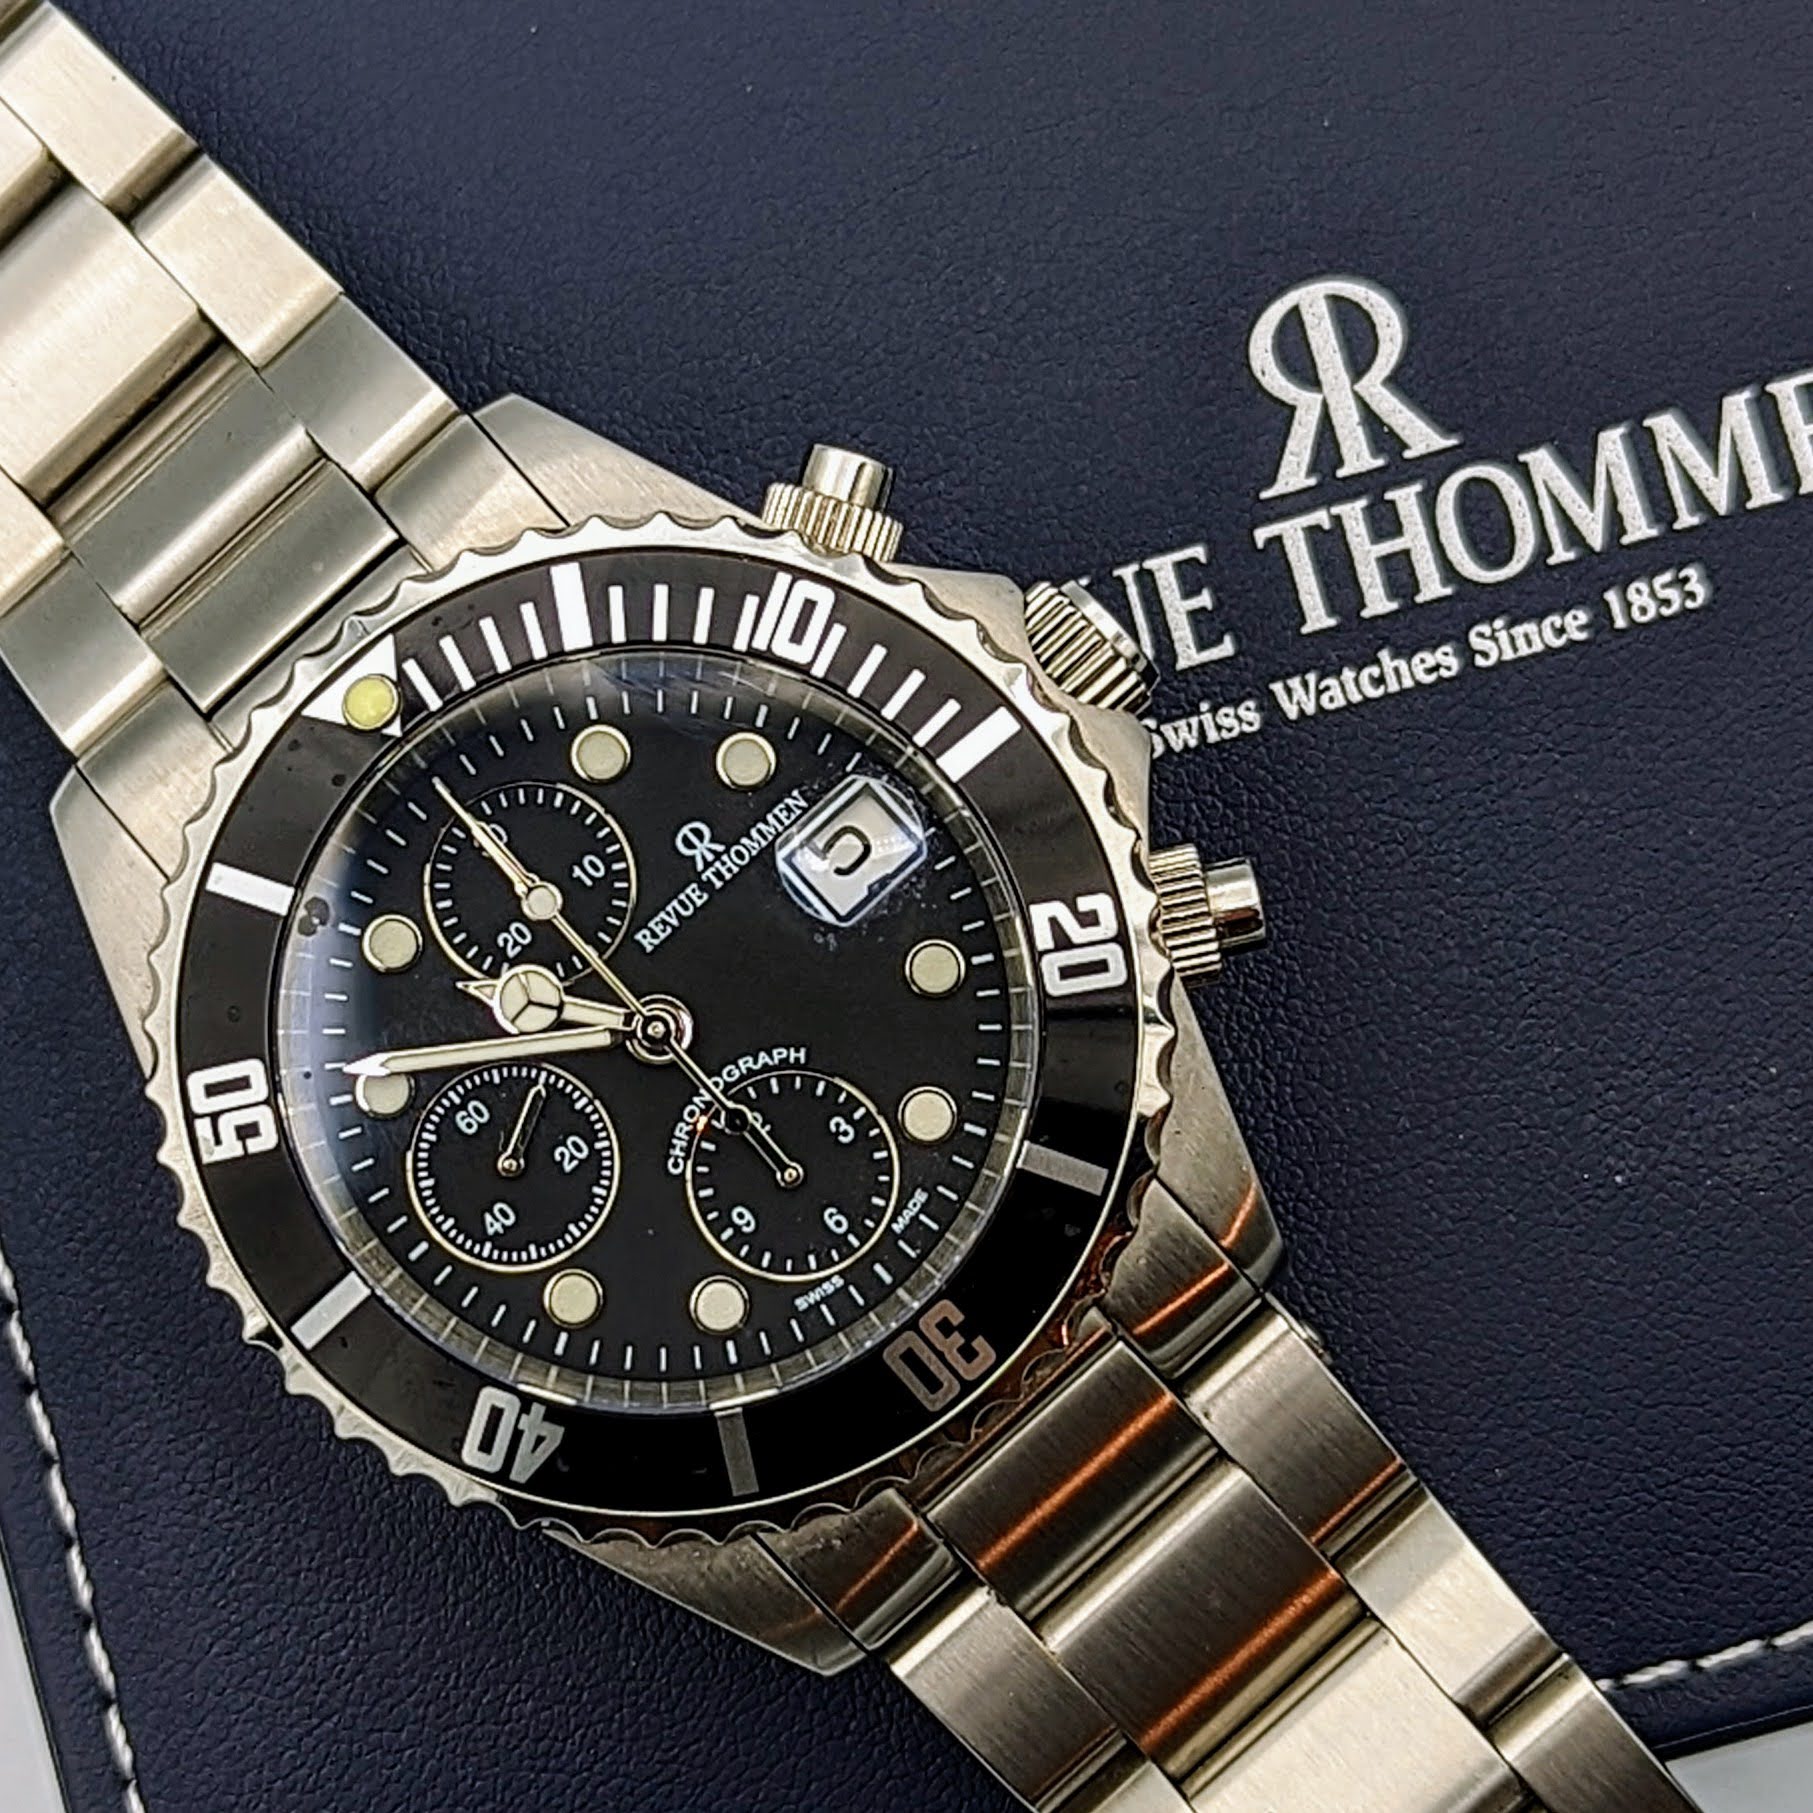 REVUE THOMMEN Diver Automatic Watch 17571.6137 Chronograph Wristwatch in BOX!